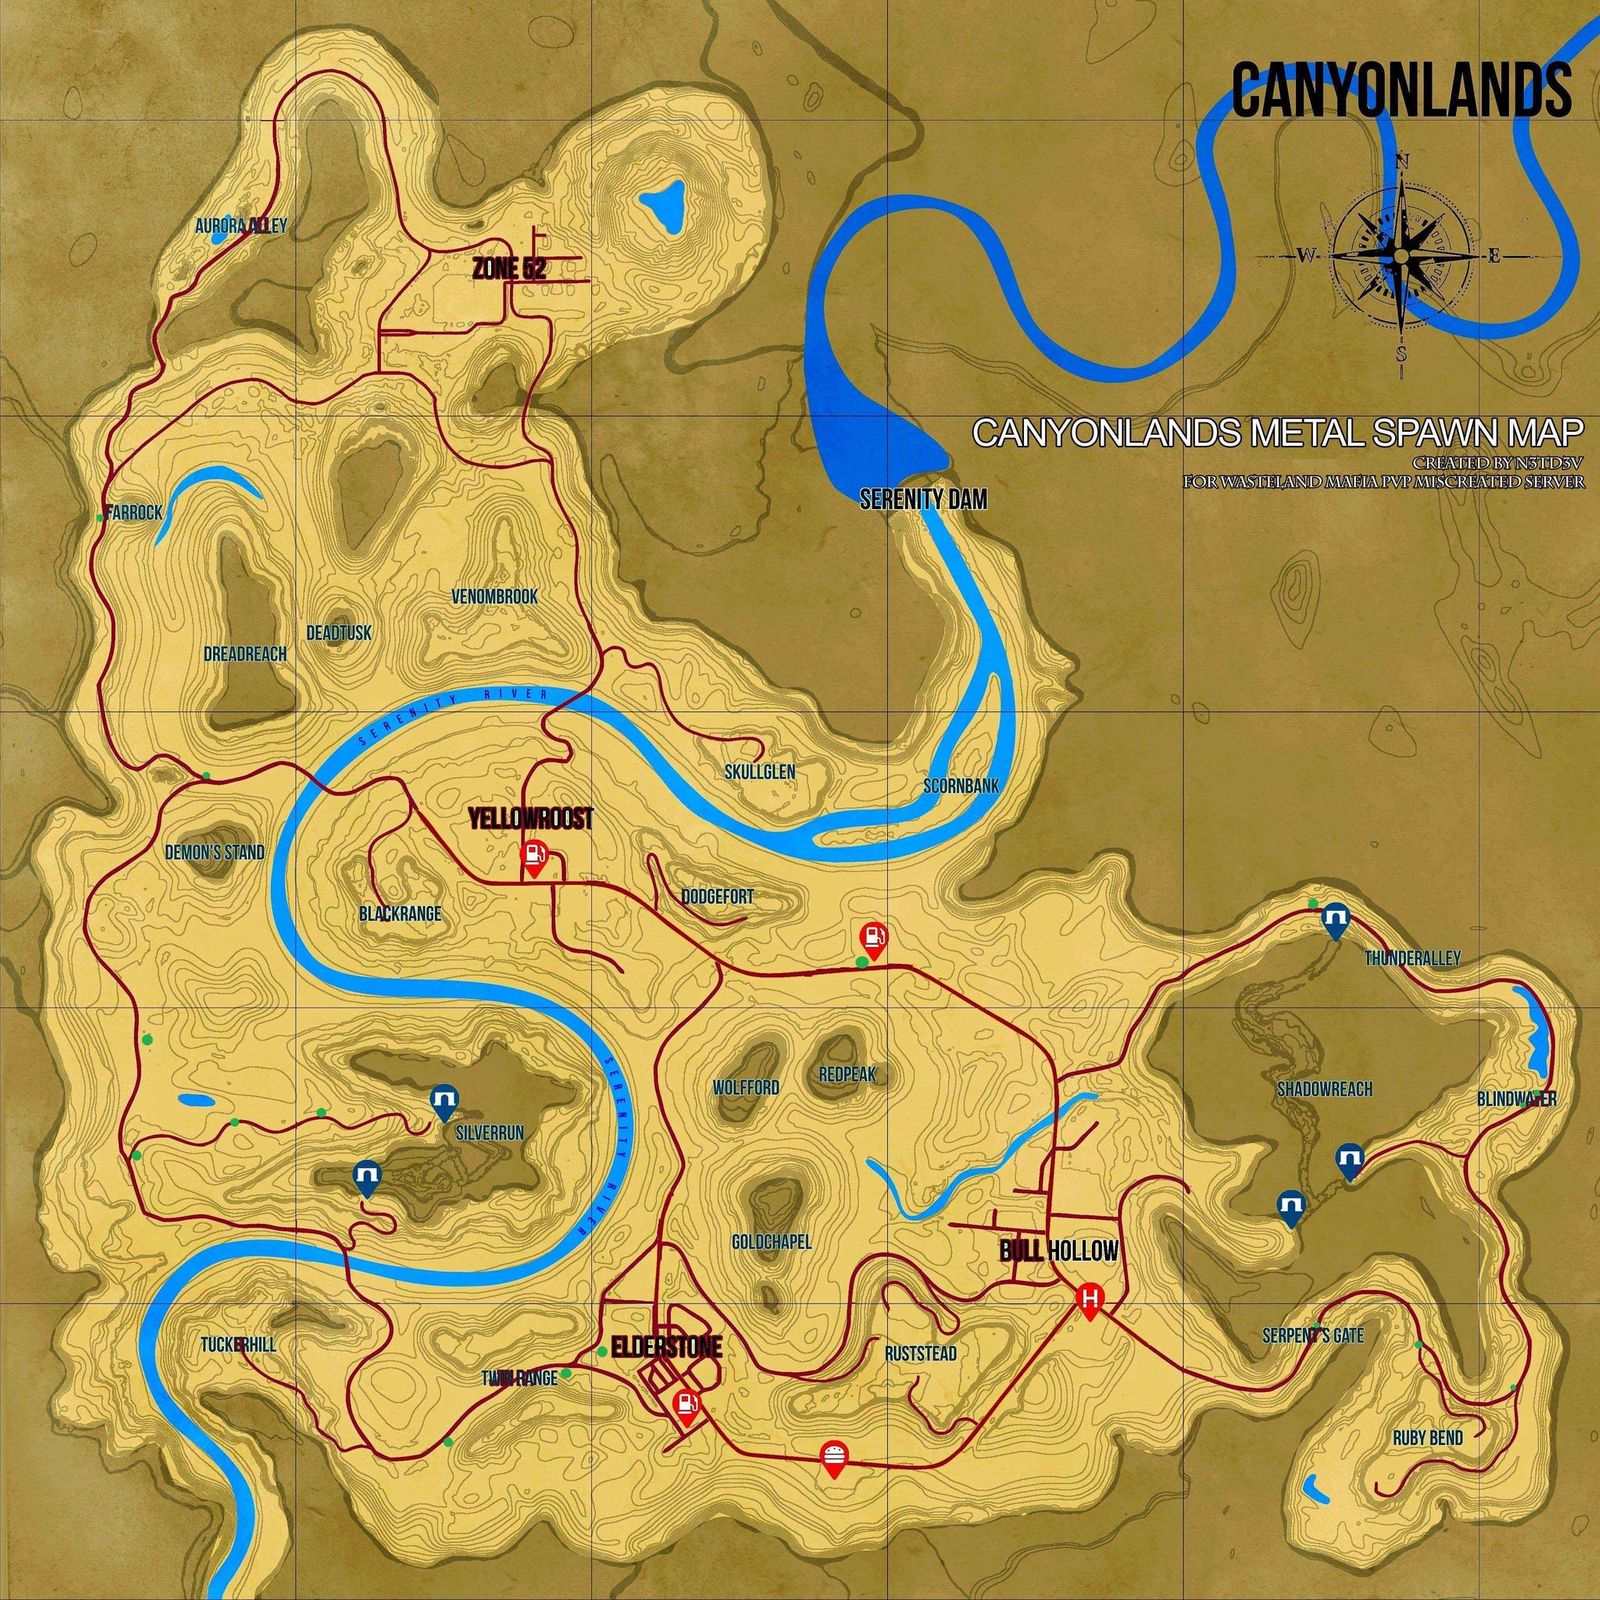 Canyonlands Metal Spawn Locations